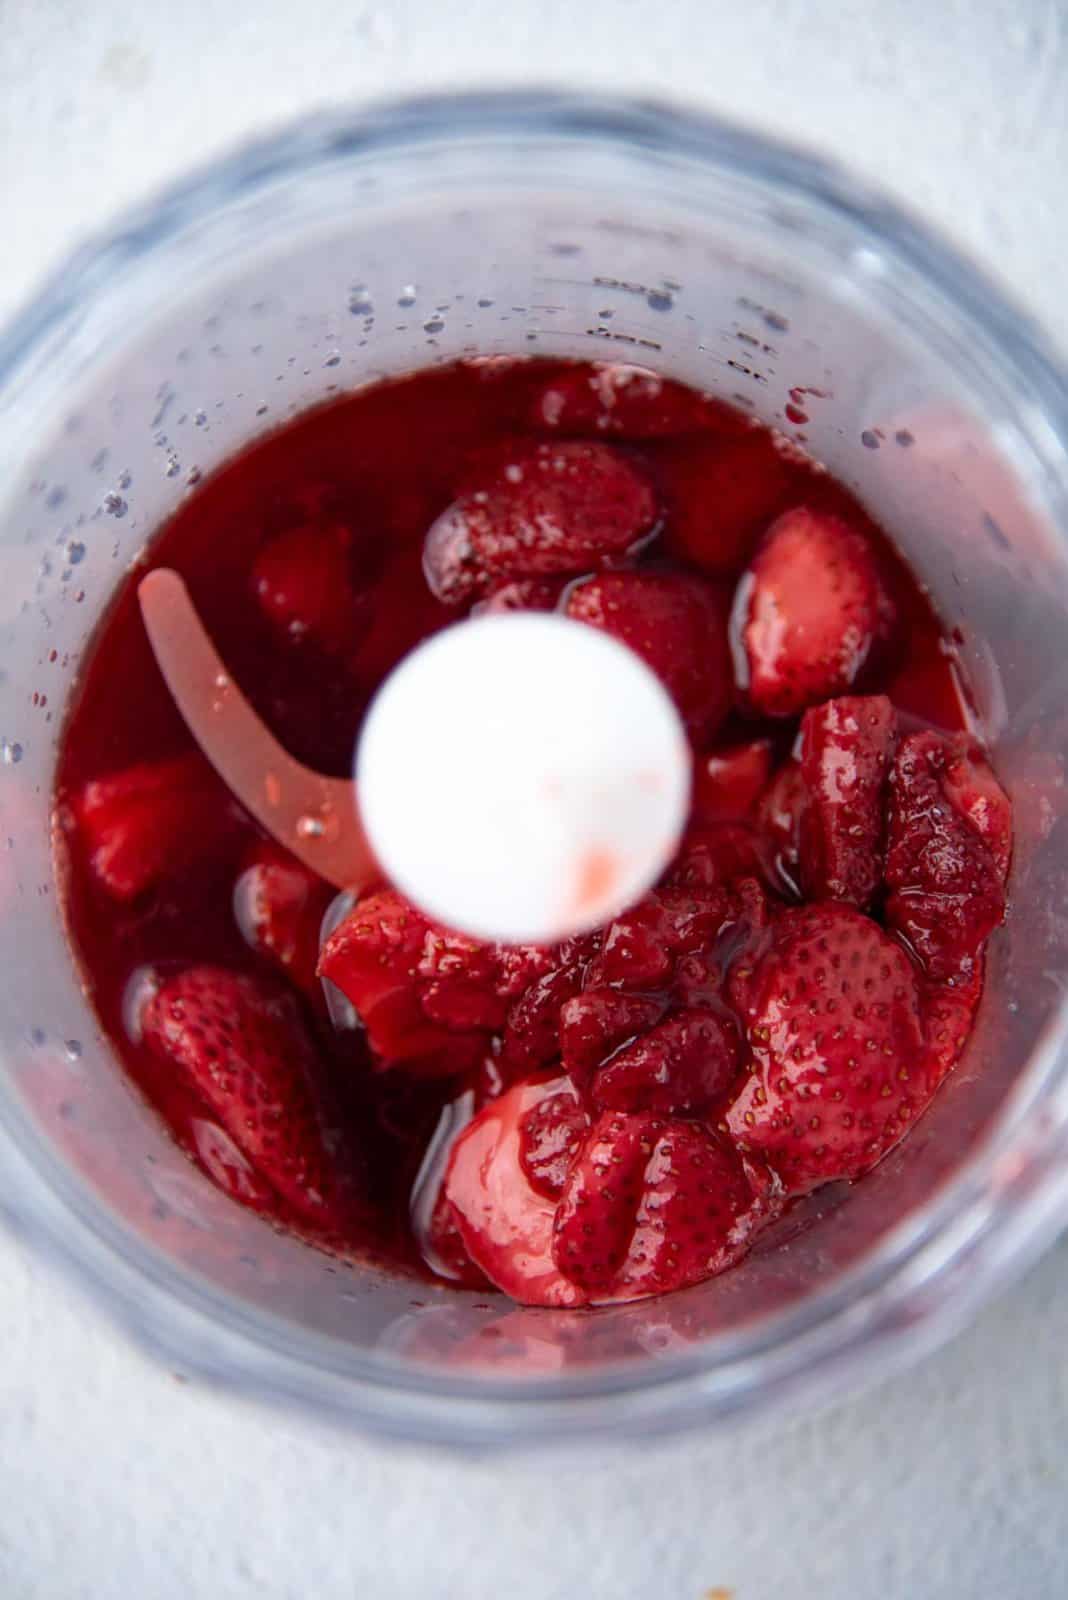 Roasted strawberries and syrup in a small blender.